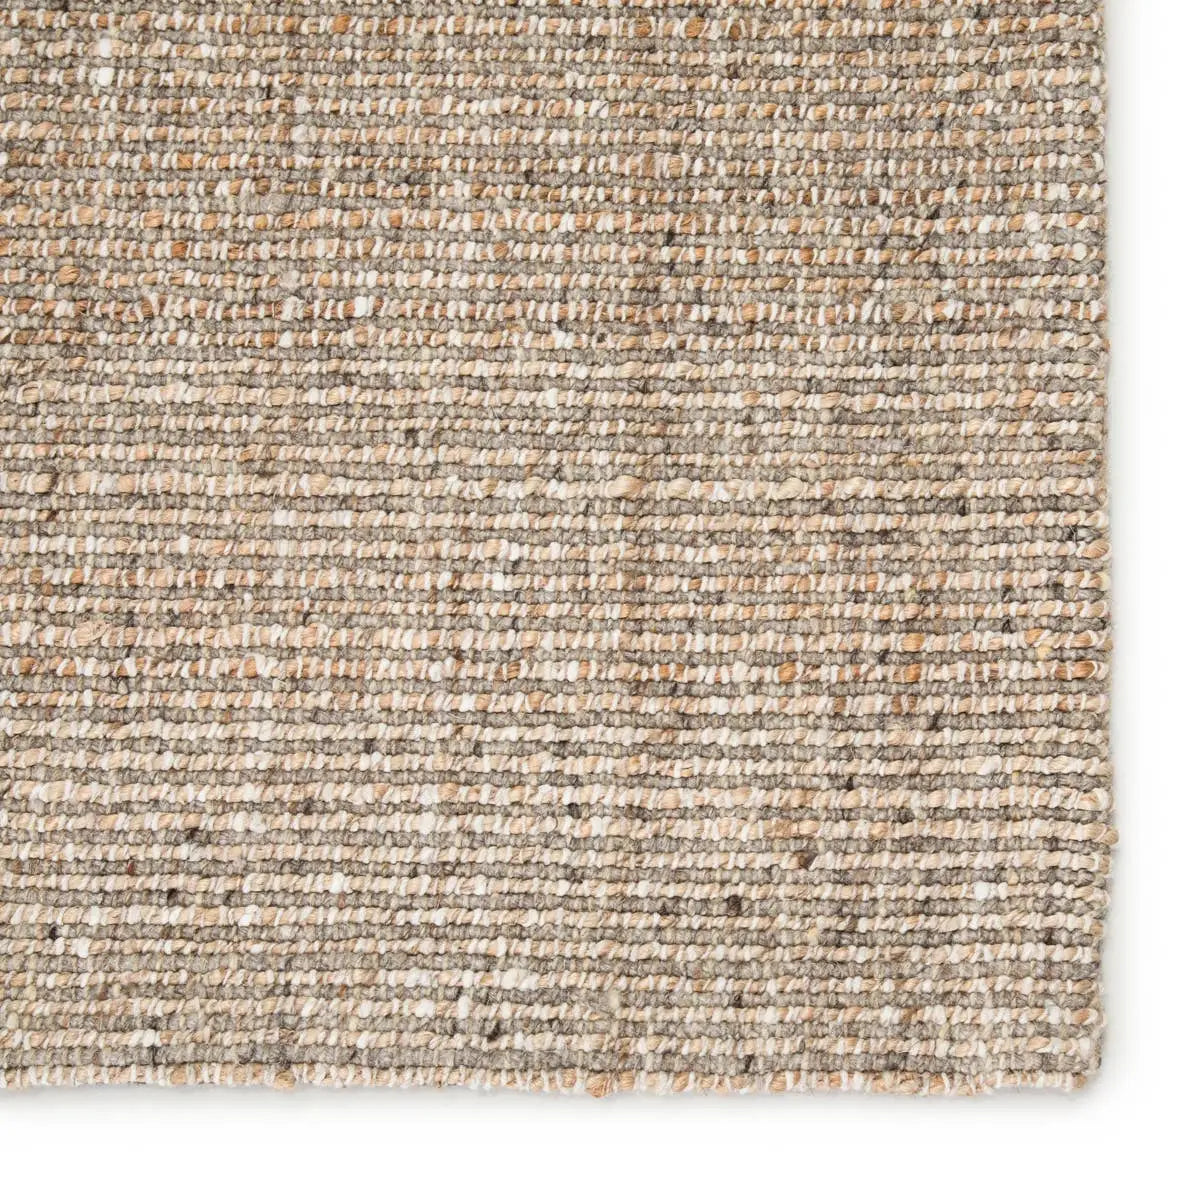 The Monterey Sutton Rug features luxury natural styles with a blend of grass fibers and soft yarns. Handwoven of jute, wool, polyester, and viscose, the sophisticated Sutton area rug boasts a versatile, heathered design. The effortless, clean look of this tan and black rug complements any modern space. Amethyst Home provides interior design services, furniture, rugs, and lighting in the Kansas City metro area.